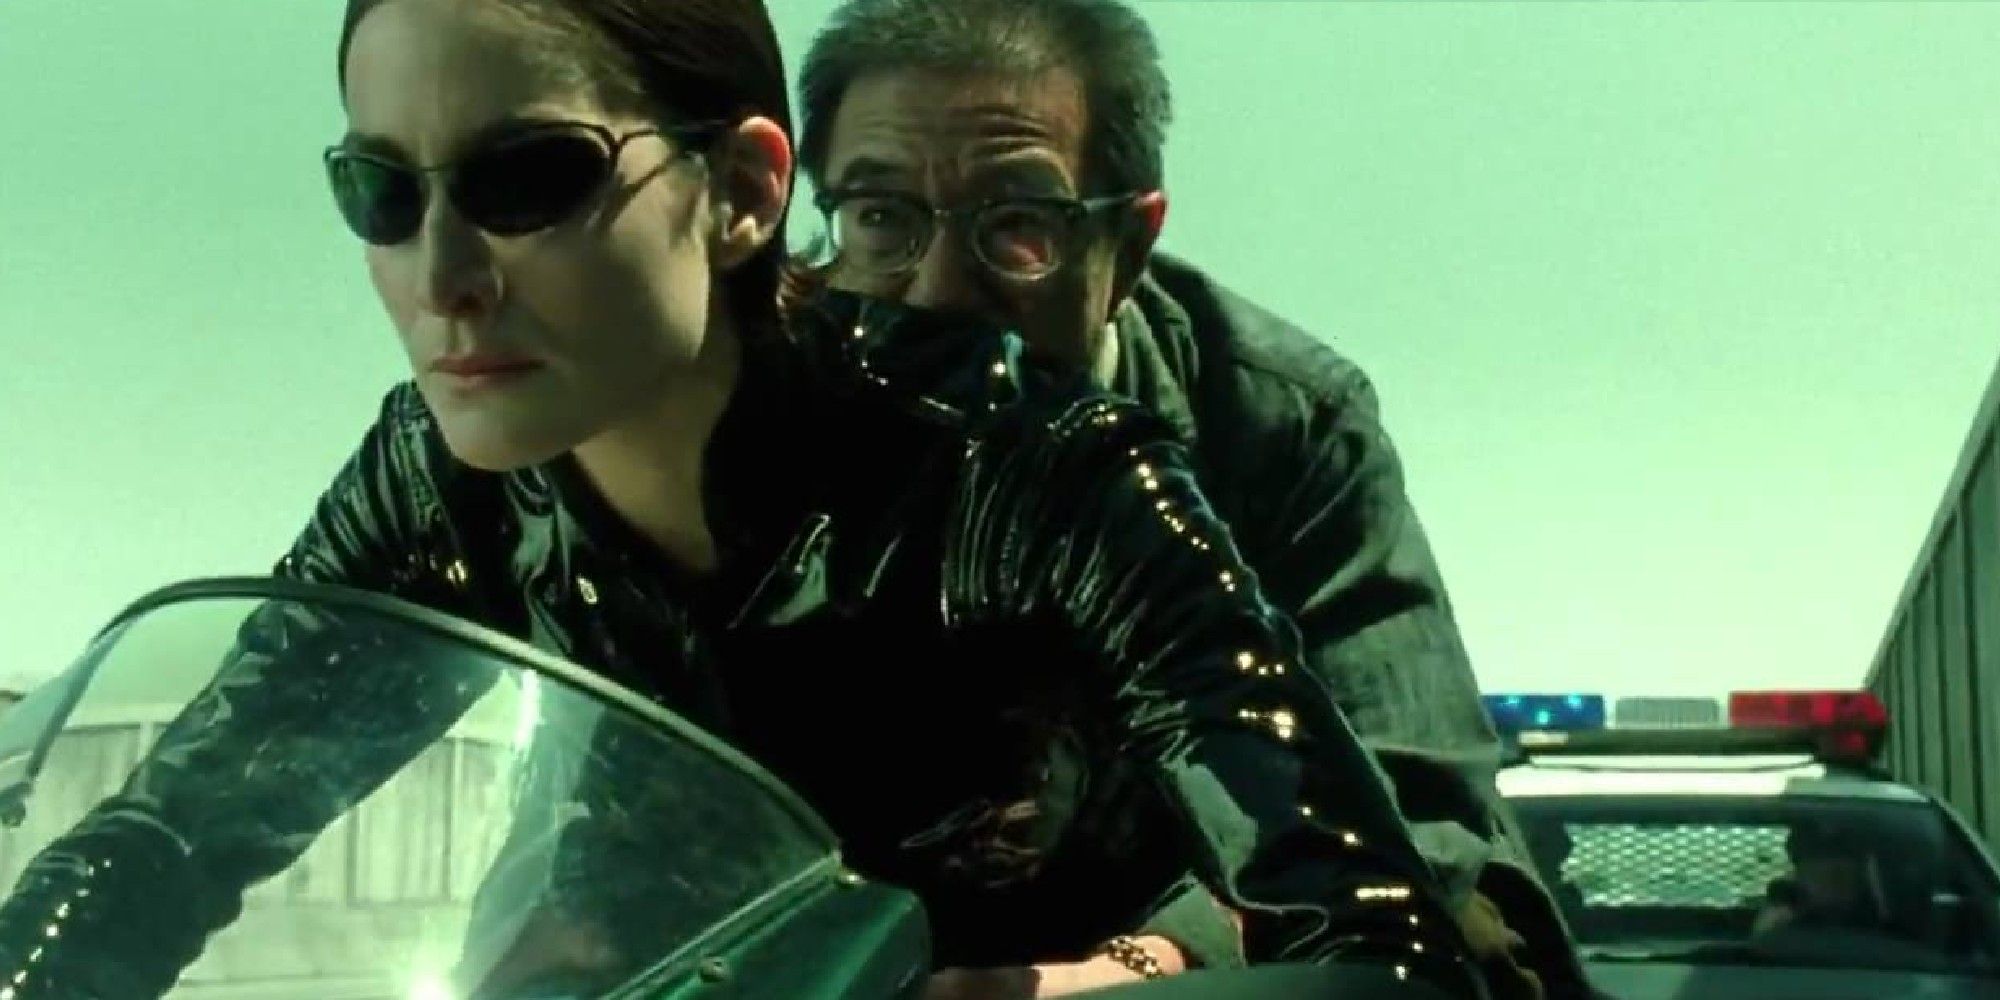 Trinity and the Keymaker on a motorcycle in The Matrix: Reloaded